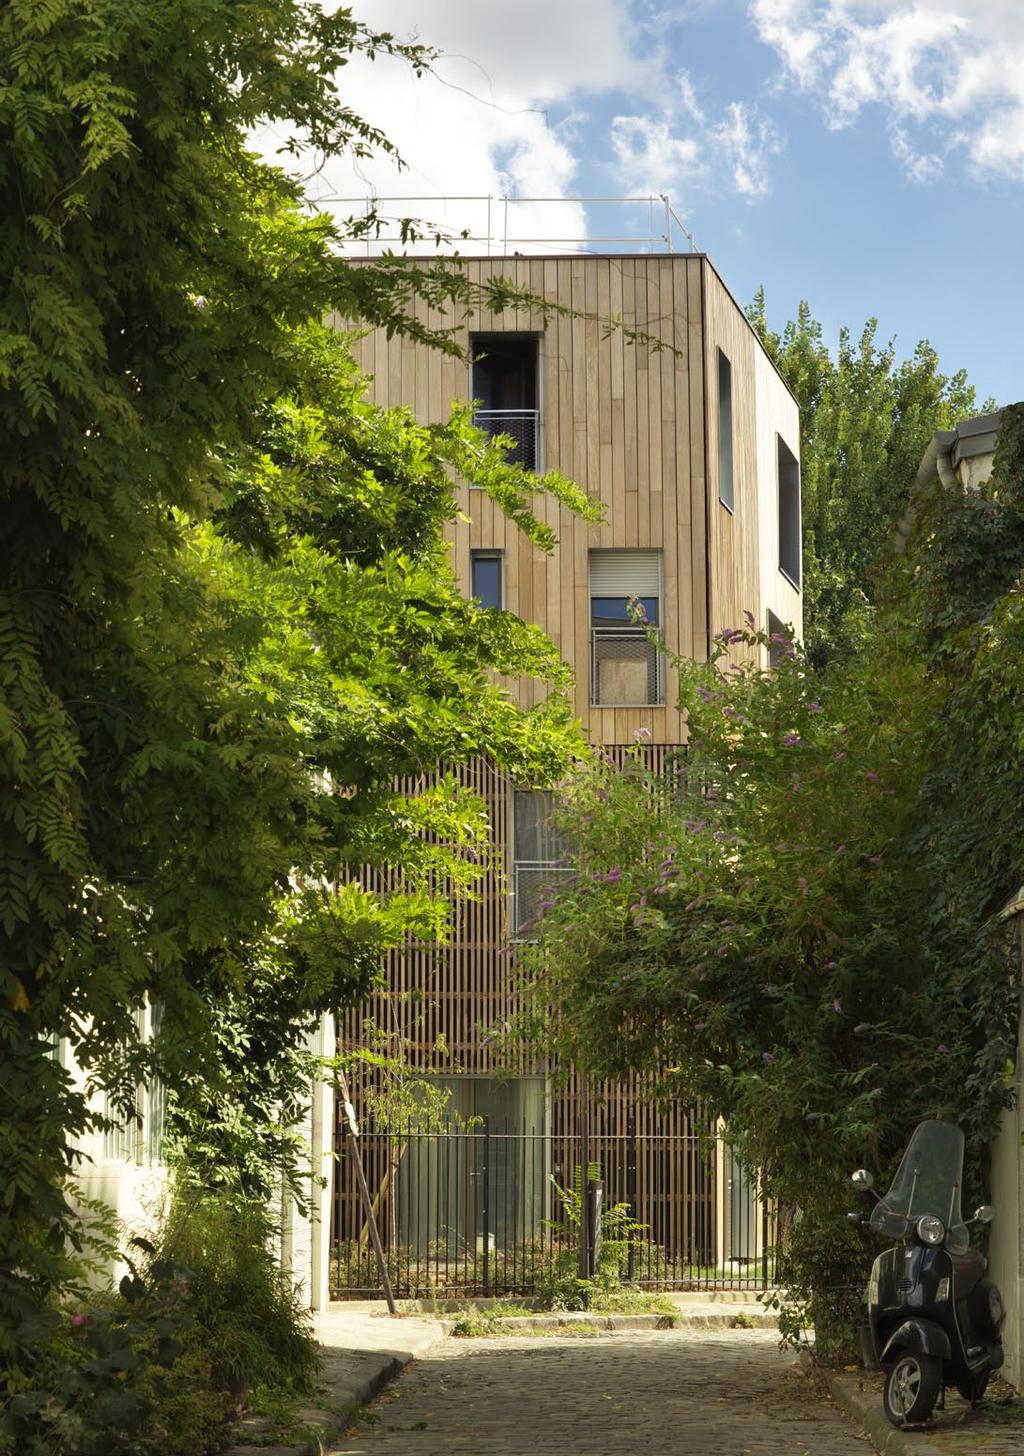 «the wooden building belongs to the greener environment in the garden